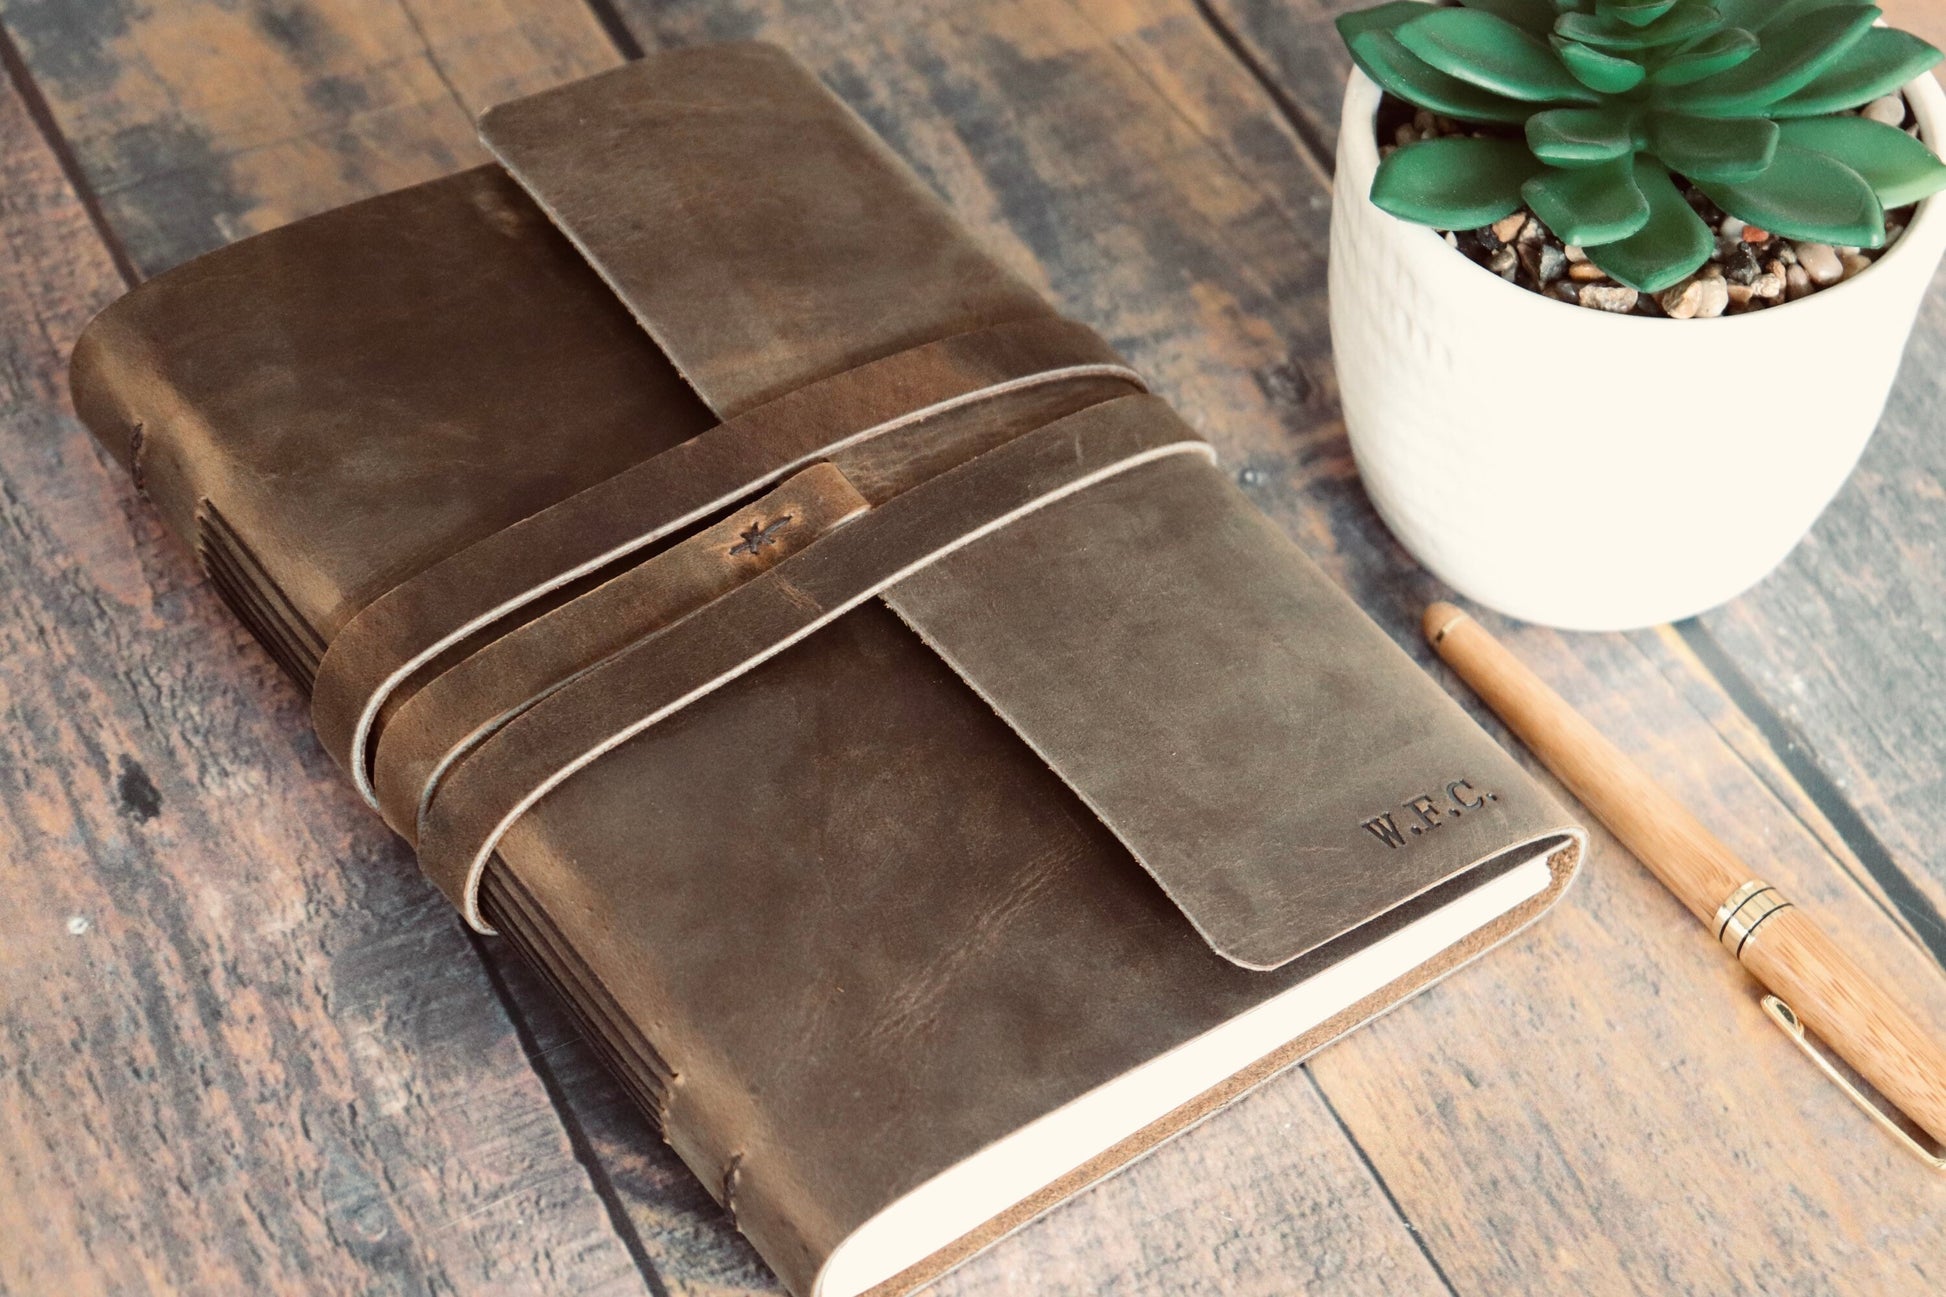 Refillable Leather Journal, Rustic Writing Diary, Classic Notebook, Sketch / Watercolor Book, Full Grain Premium Leather Bound, Customizable